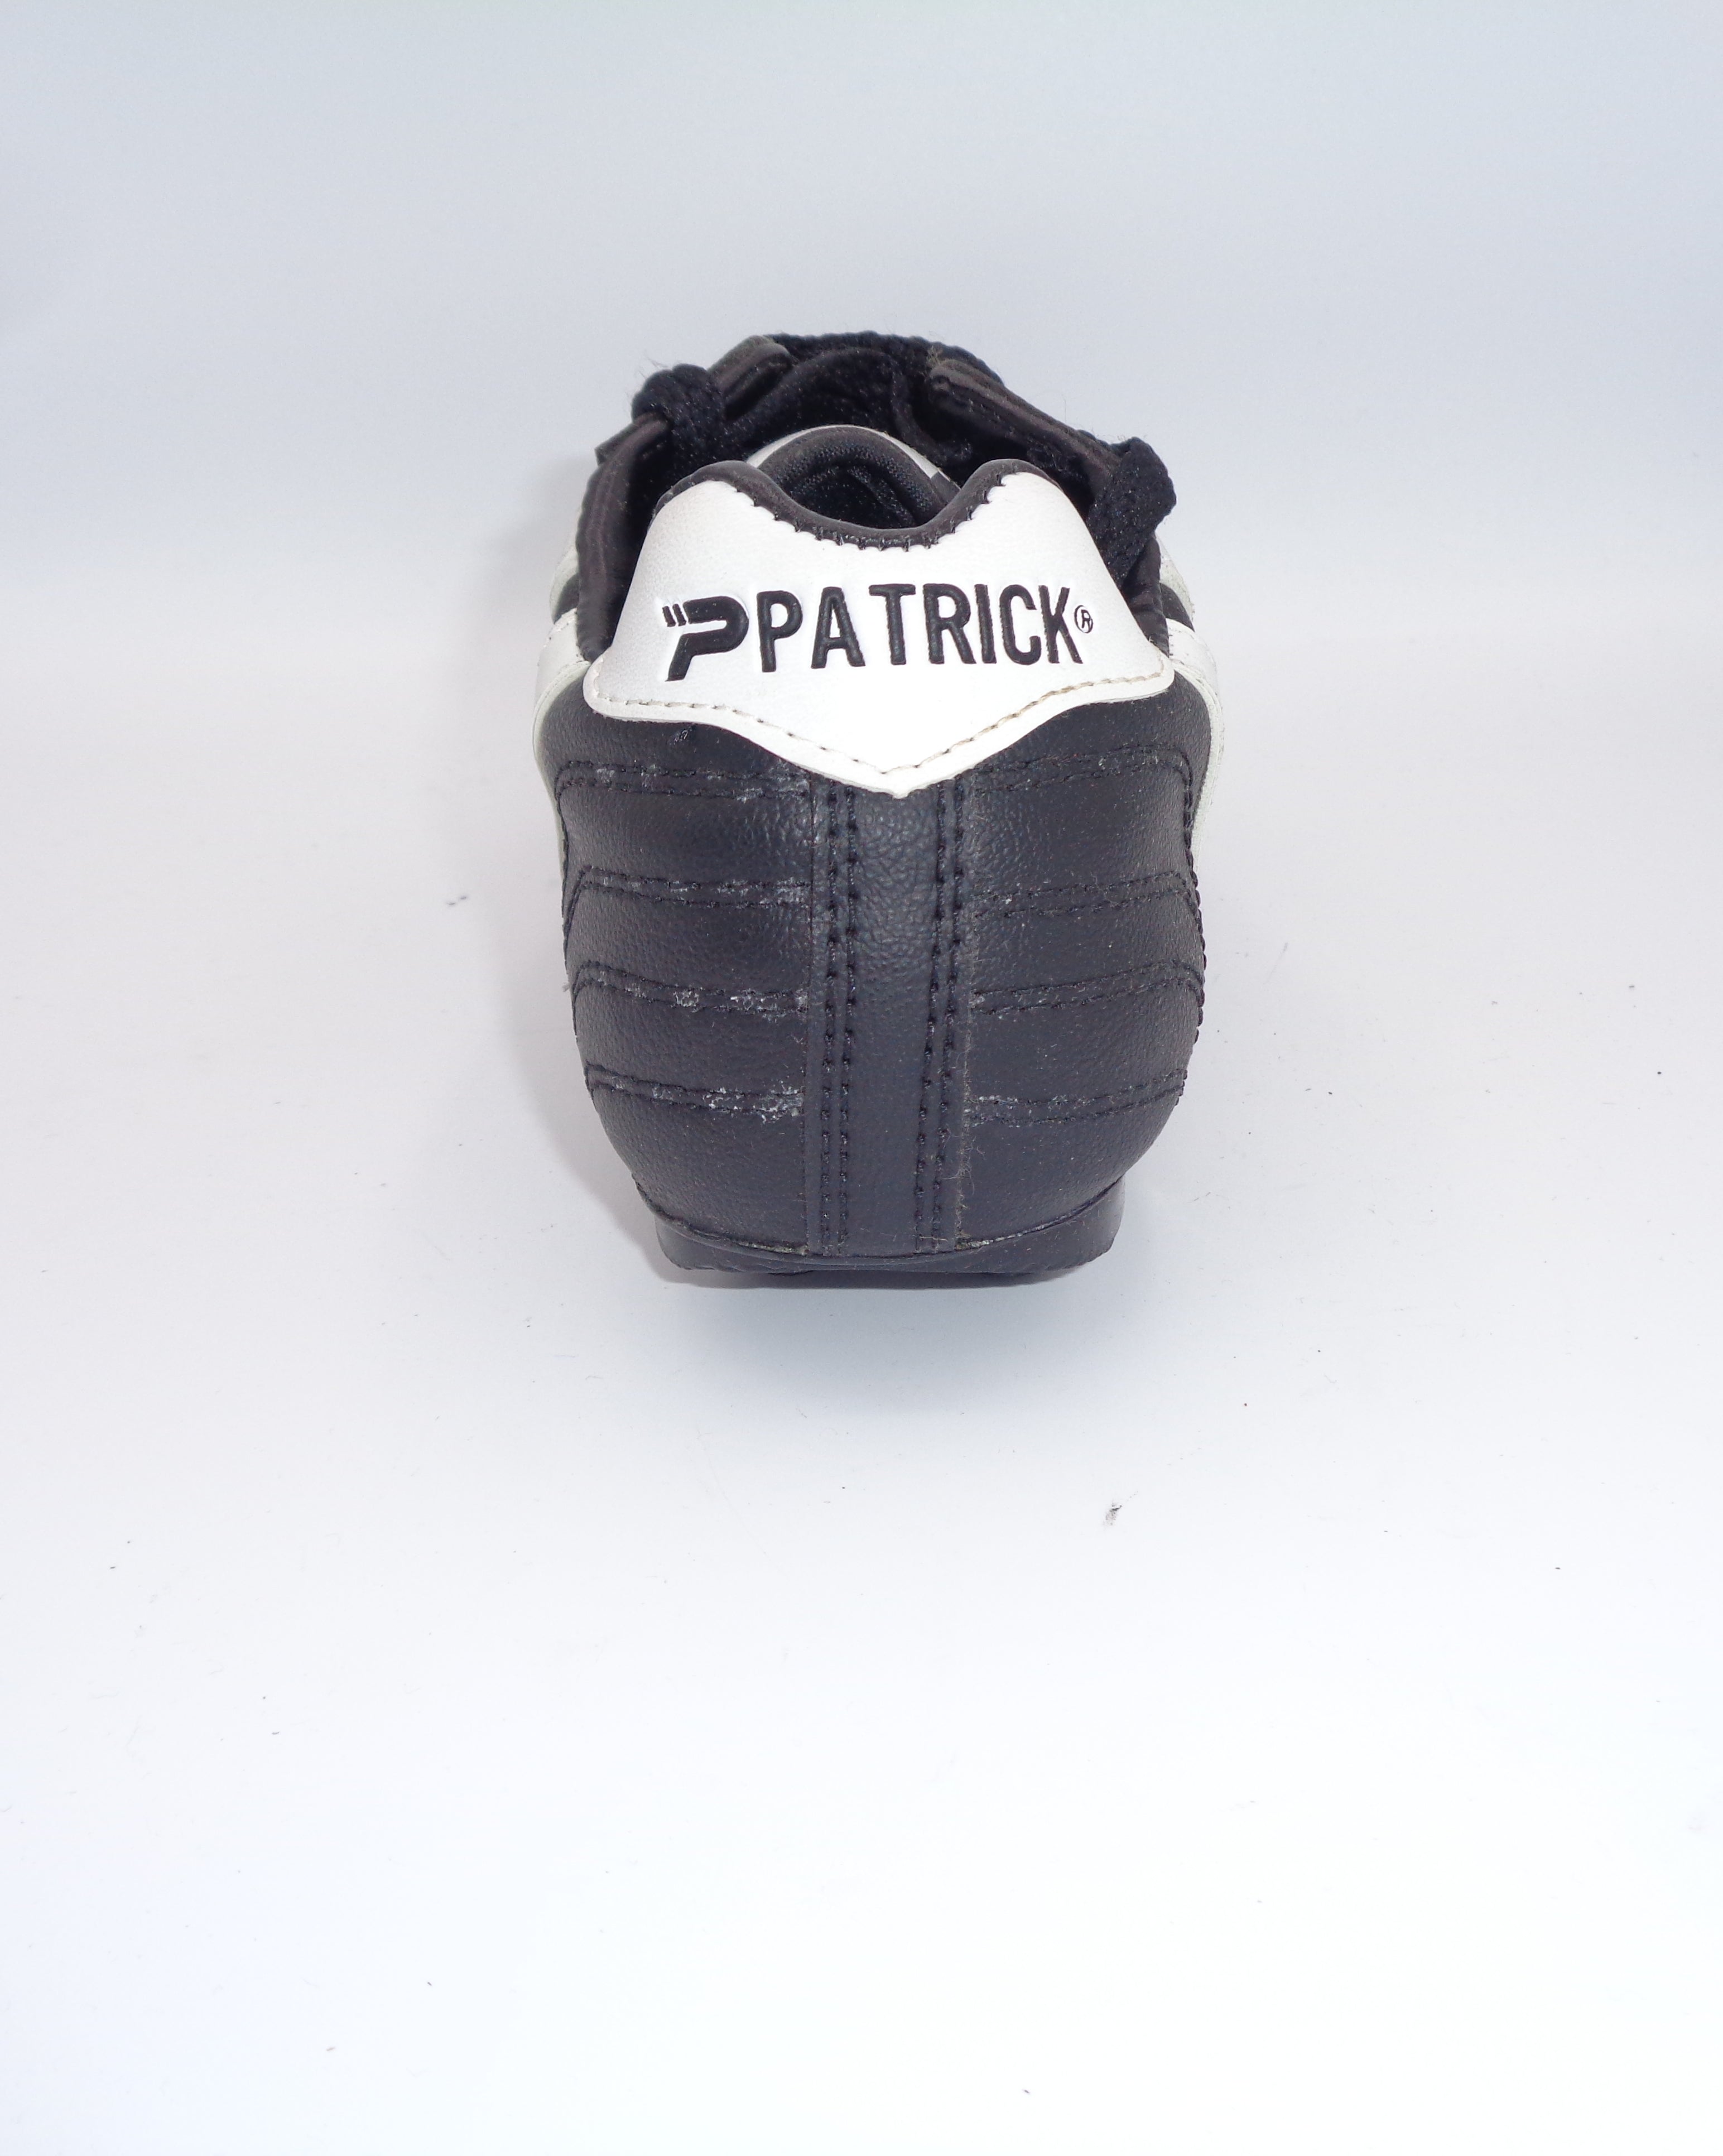 PATRICK DISCOVERY FOOTBALL BOOTS - PATRICK - SIZE 5